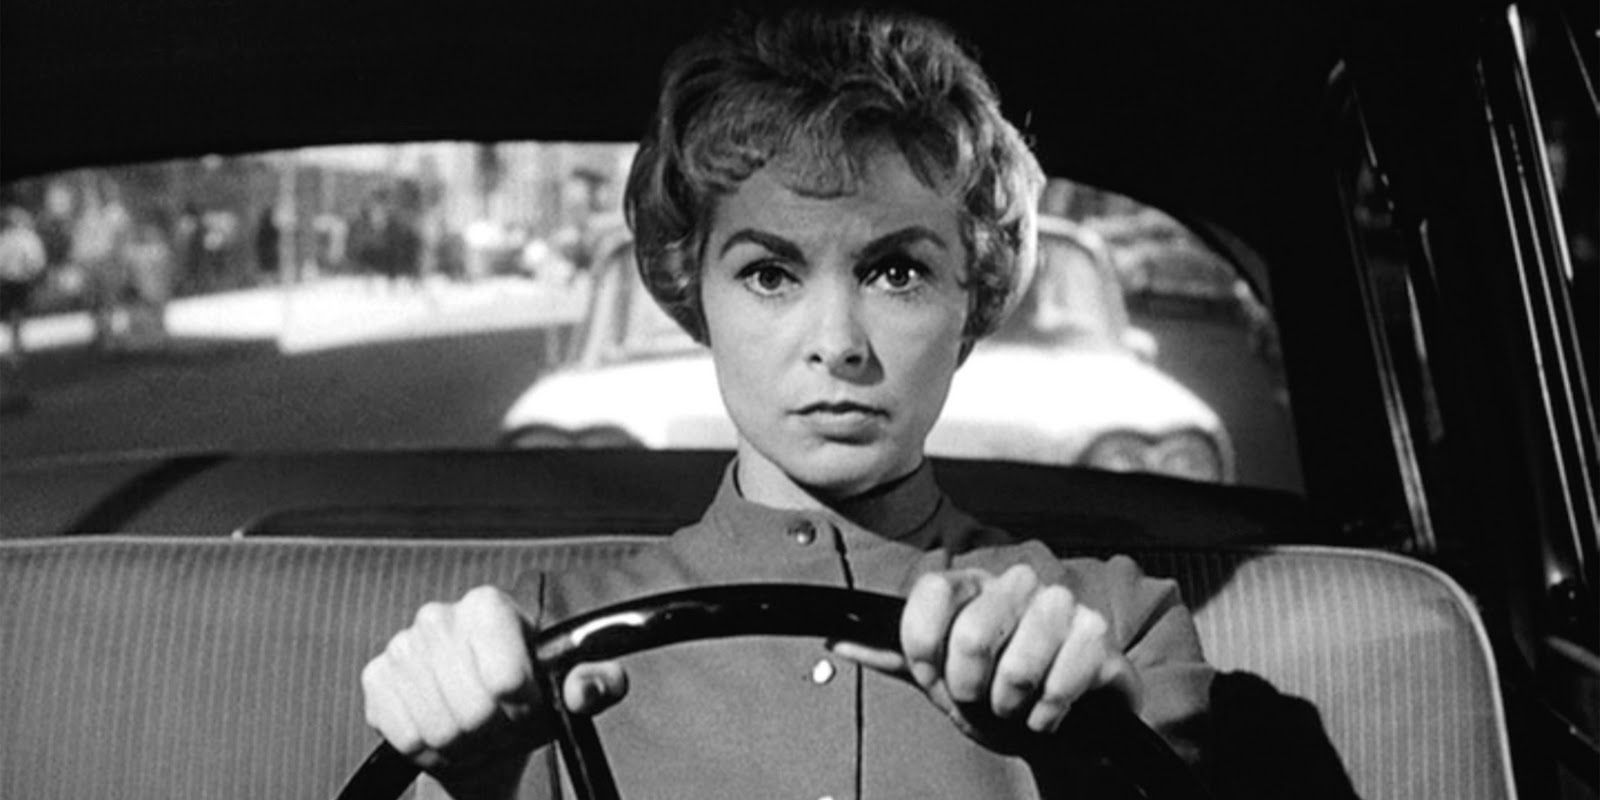 Janet Leigh driving a car in Psycho, looking determined.